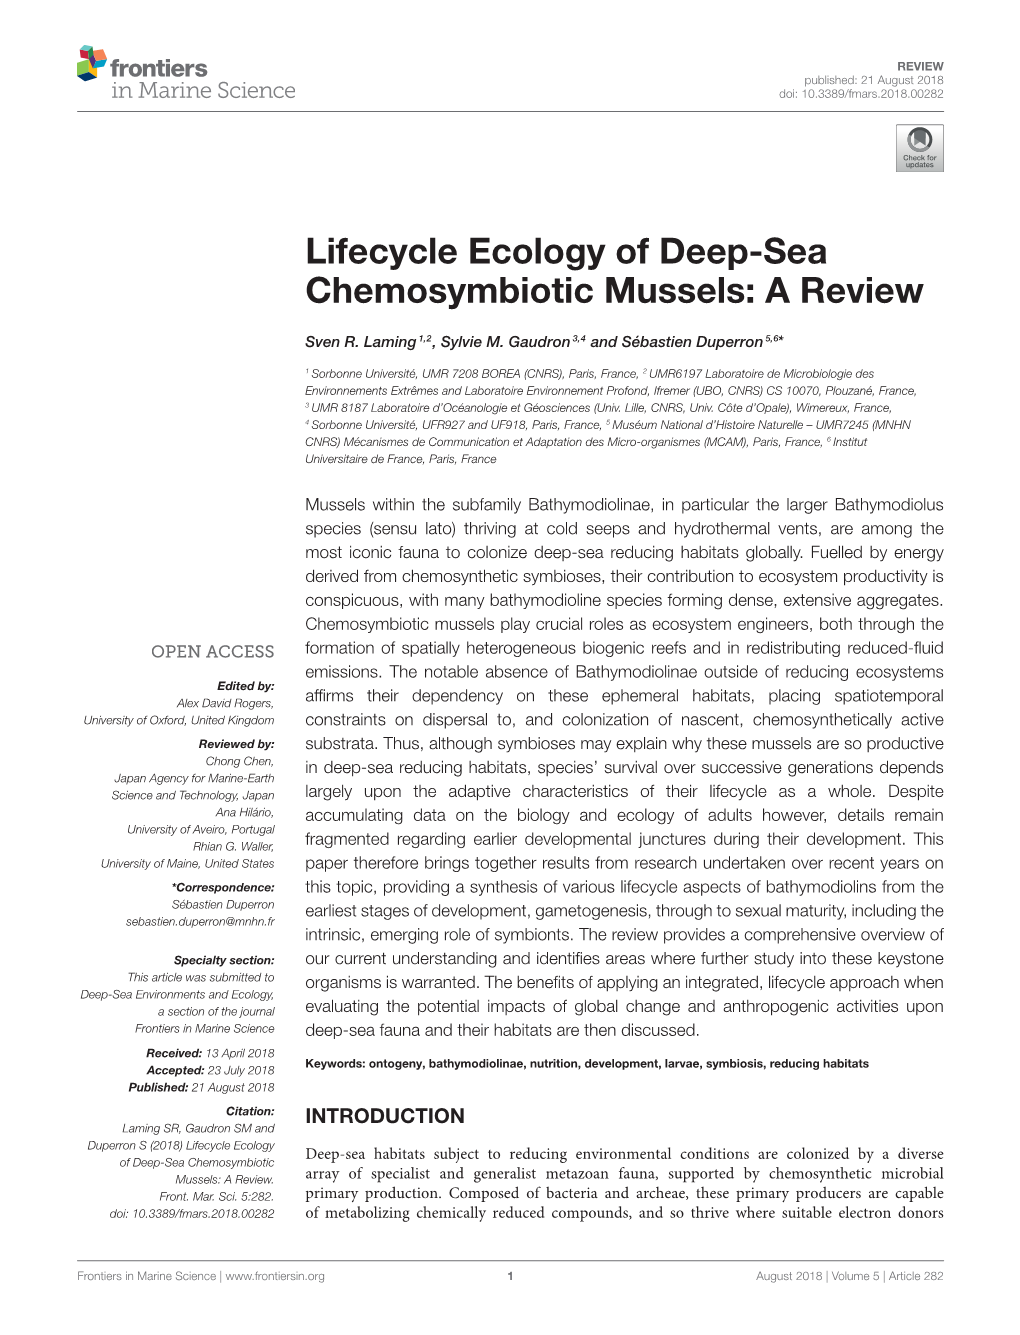 Lifecycle Ecology of Deep-Sea Chemosymbiotic Mussels: a Review